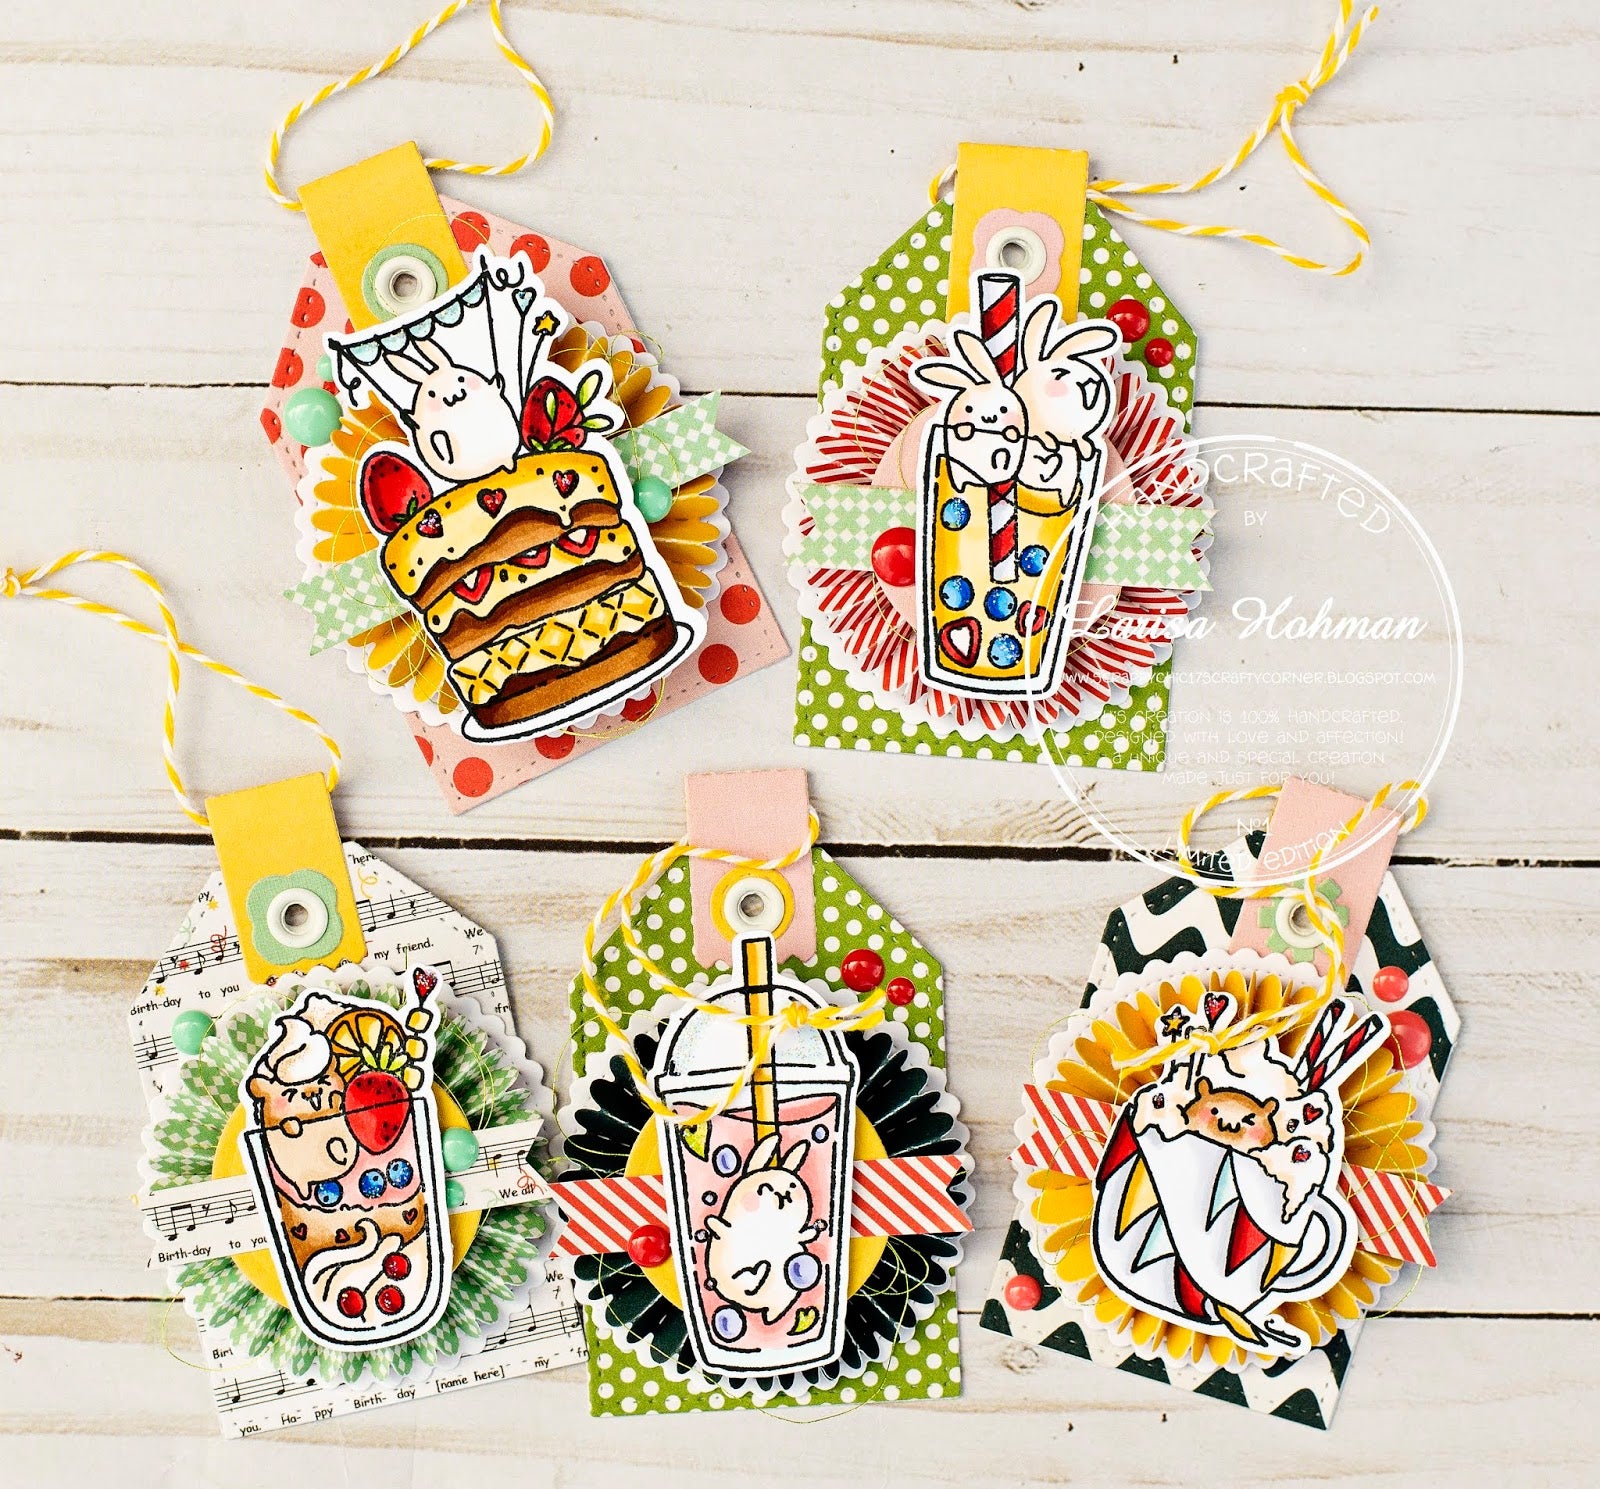 Guest Designer Larisa Hohman with Small Surprises TAGS!